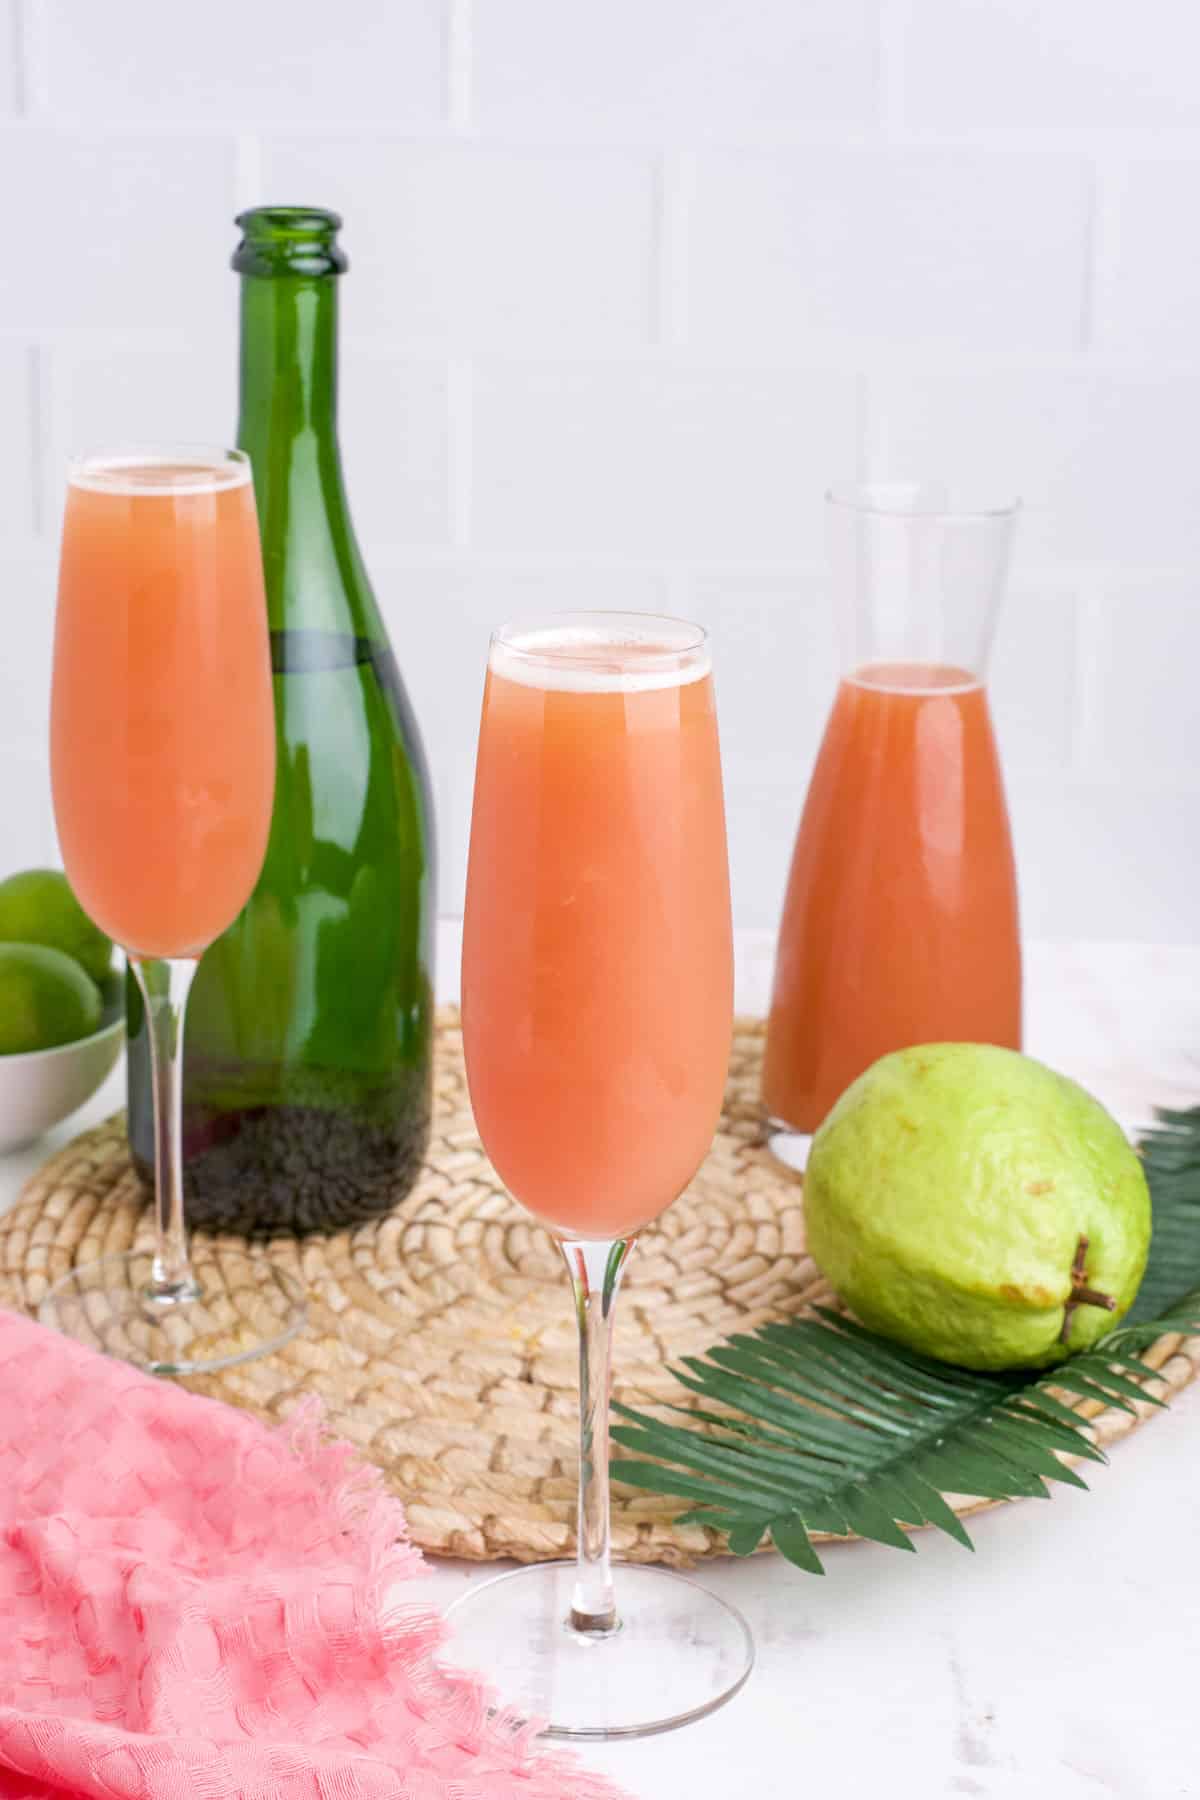 Guava mimosas on the table with a carafe of guava juice and bottle of champagne in the background.